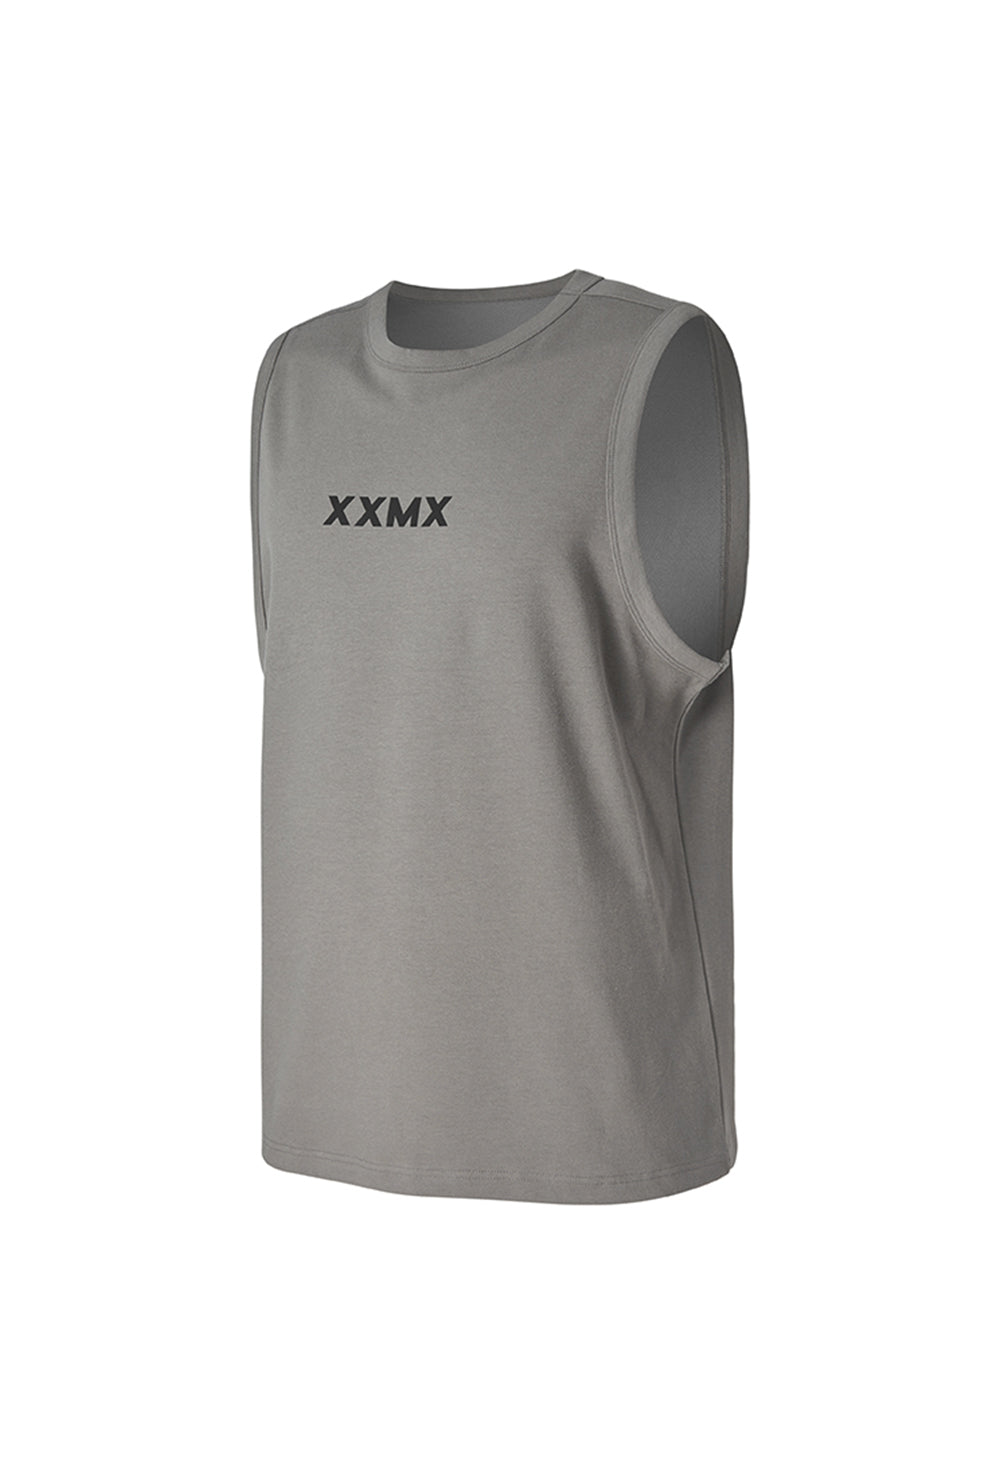 Muscle Fit Dual Sleeveless - State Mud Gray